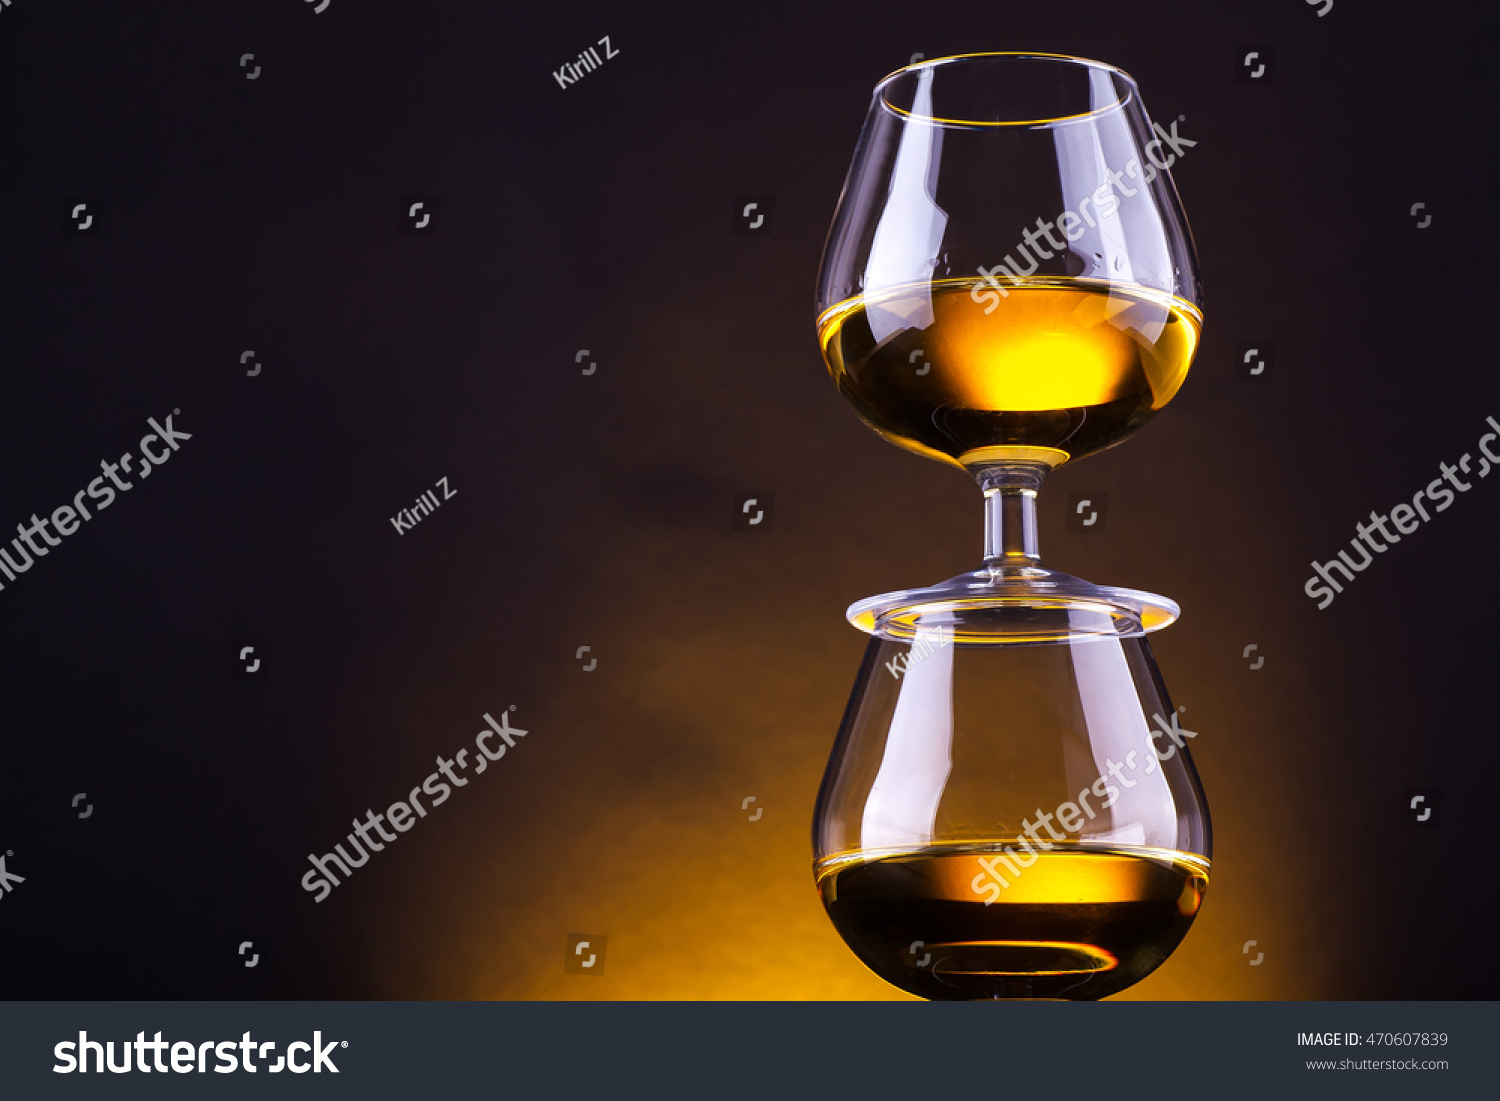 Snifter glasses with brandy stacked on top of each other over a yellow lit background #470607839